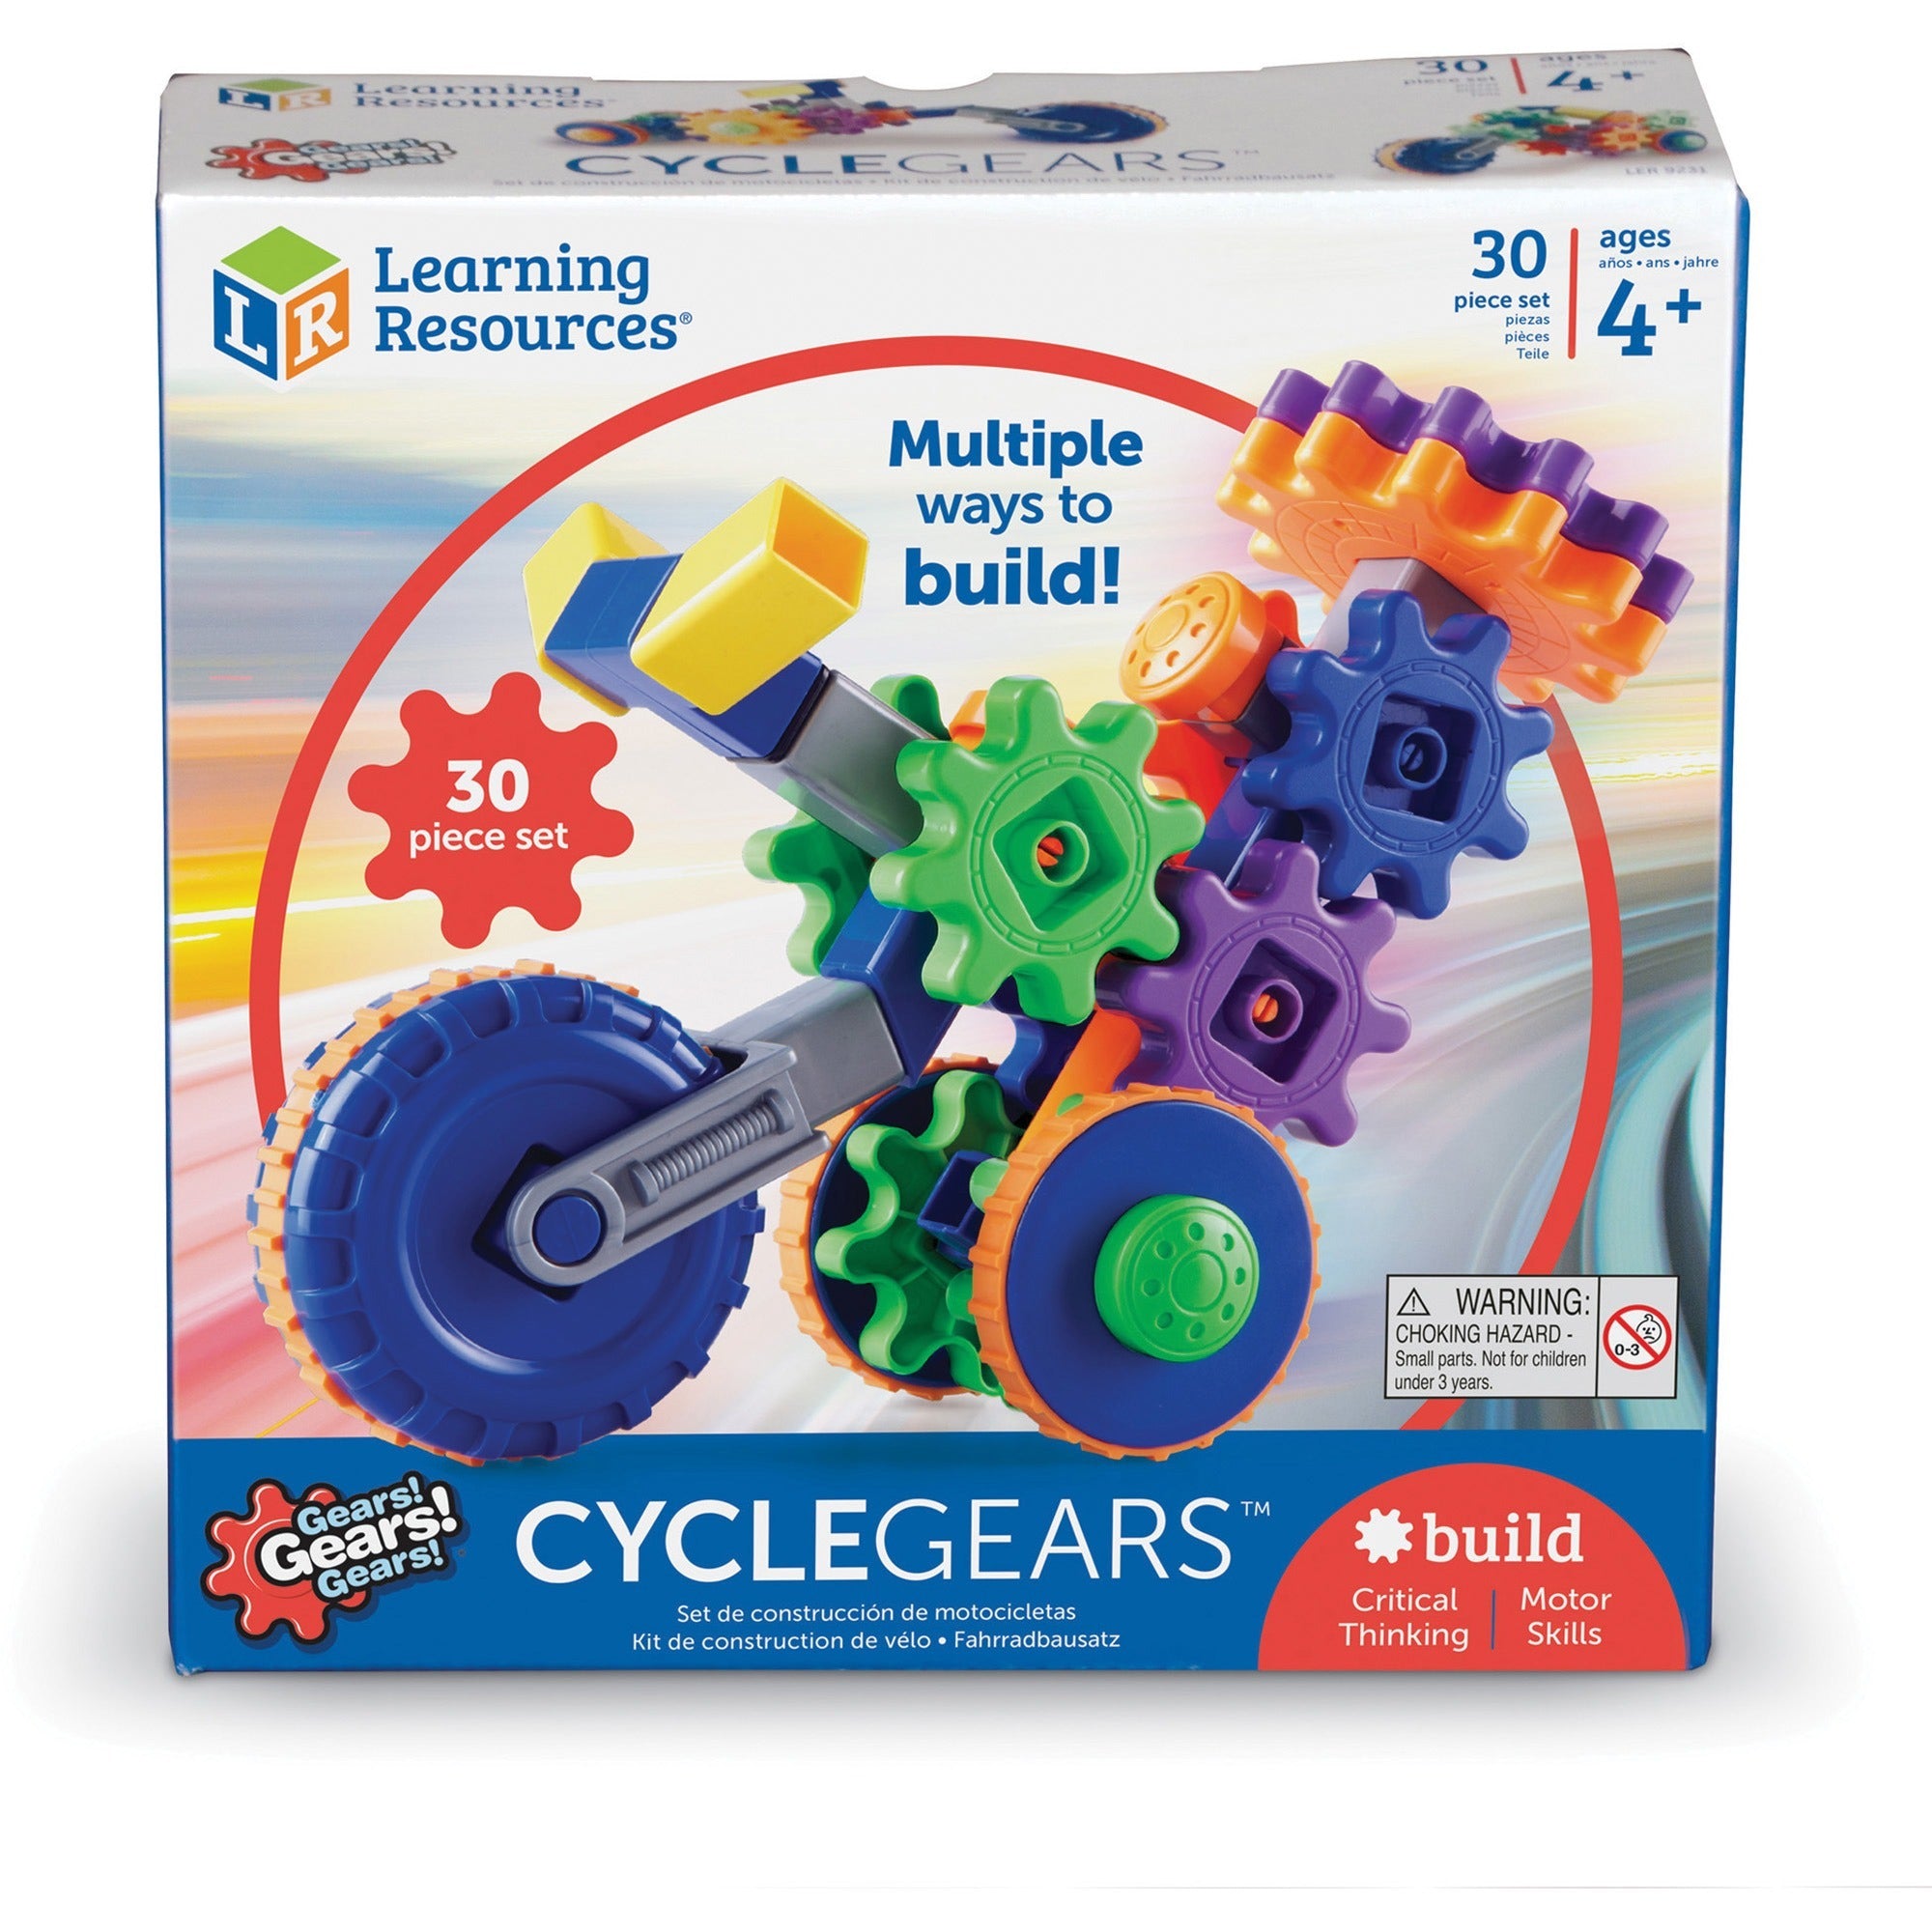 learning-resources-gears!-cycle-gears-building-kit-theme-subject-learning-skill-learning-building-stem-critical-thinking-creativity-fine-motor-cause-&-effect-eye-hand-coordination-problem-solving-sequential-thinking-bicycle-tactile-di_lrnler9231 - 1